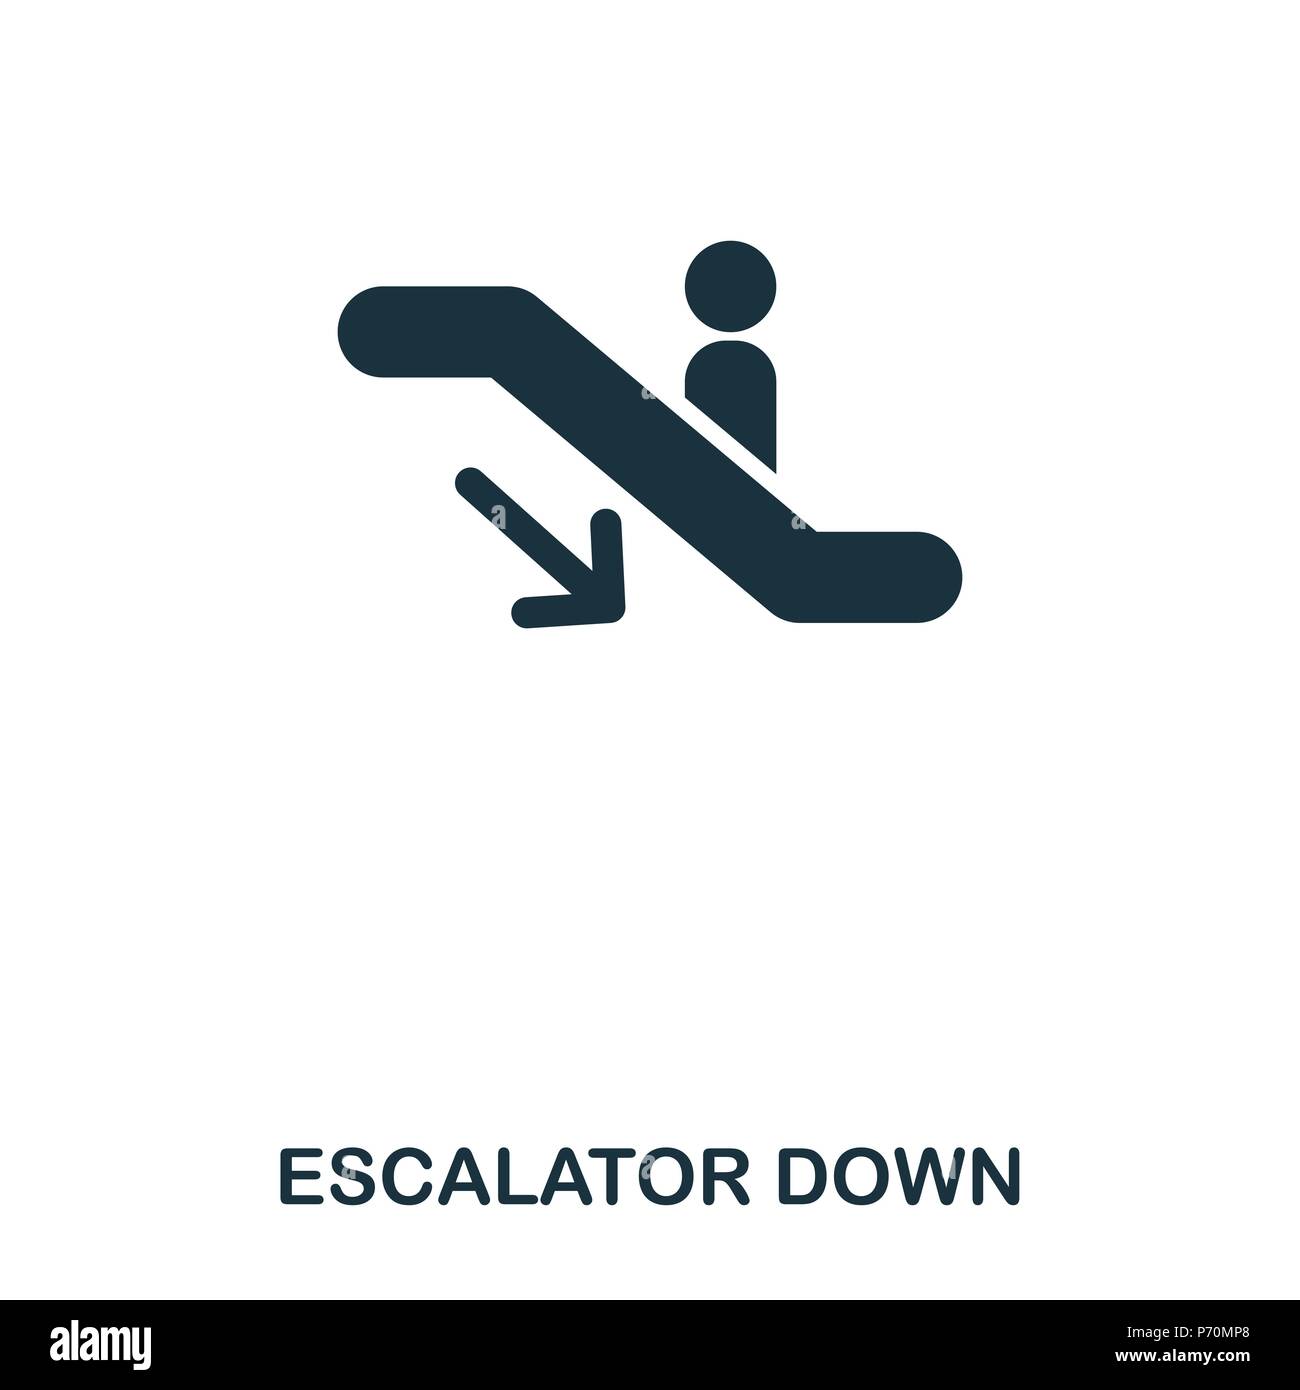 Escalator Down icon. Line style icon design. UI. Illustration of escalator down icon. Pictogram isolated on white. Ready to use in web design, apps, s Stock Vector